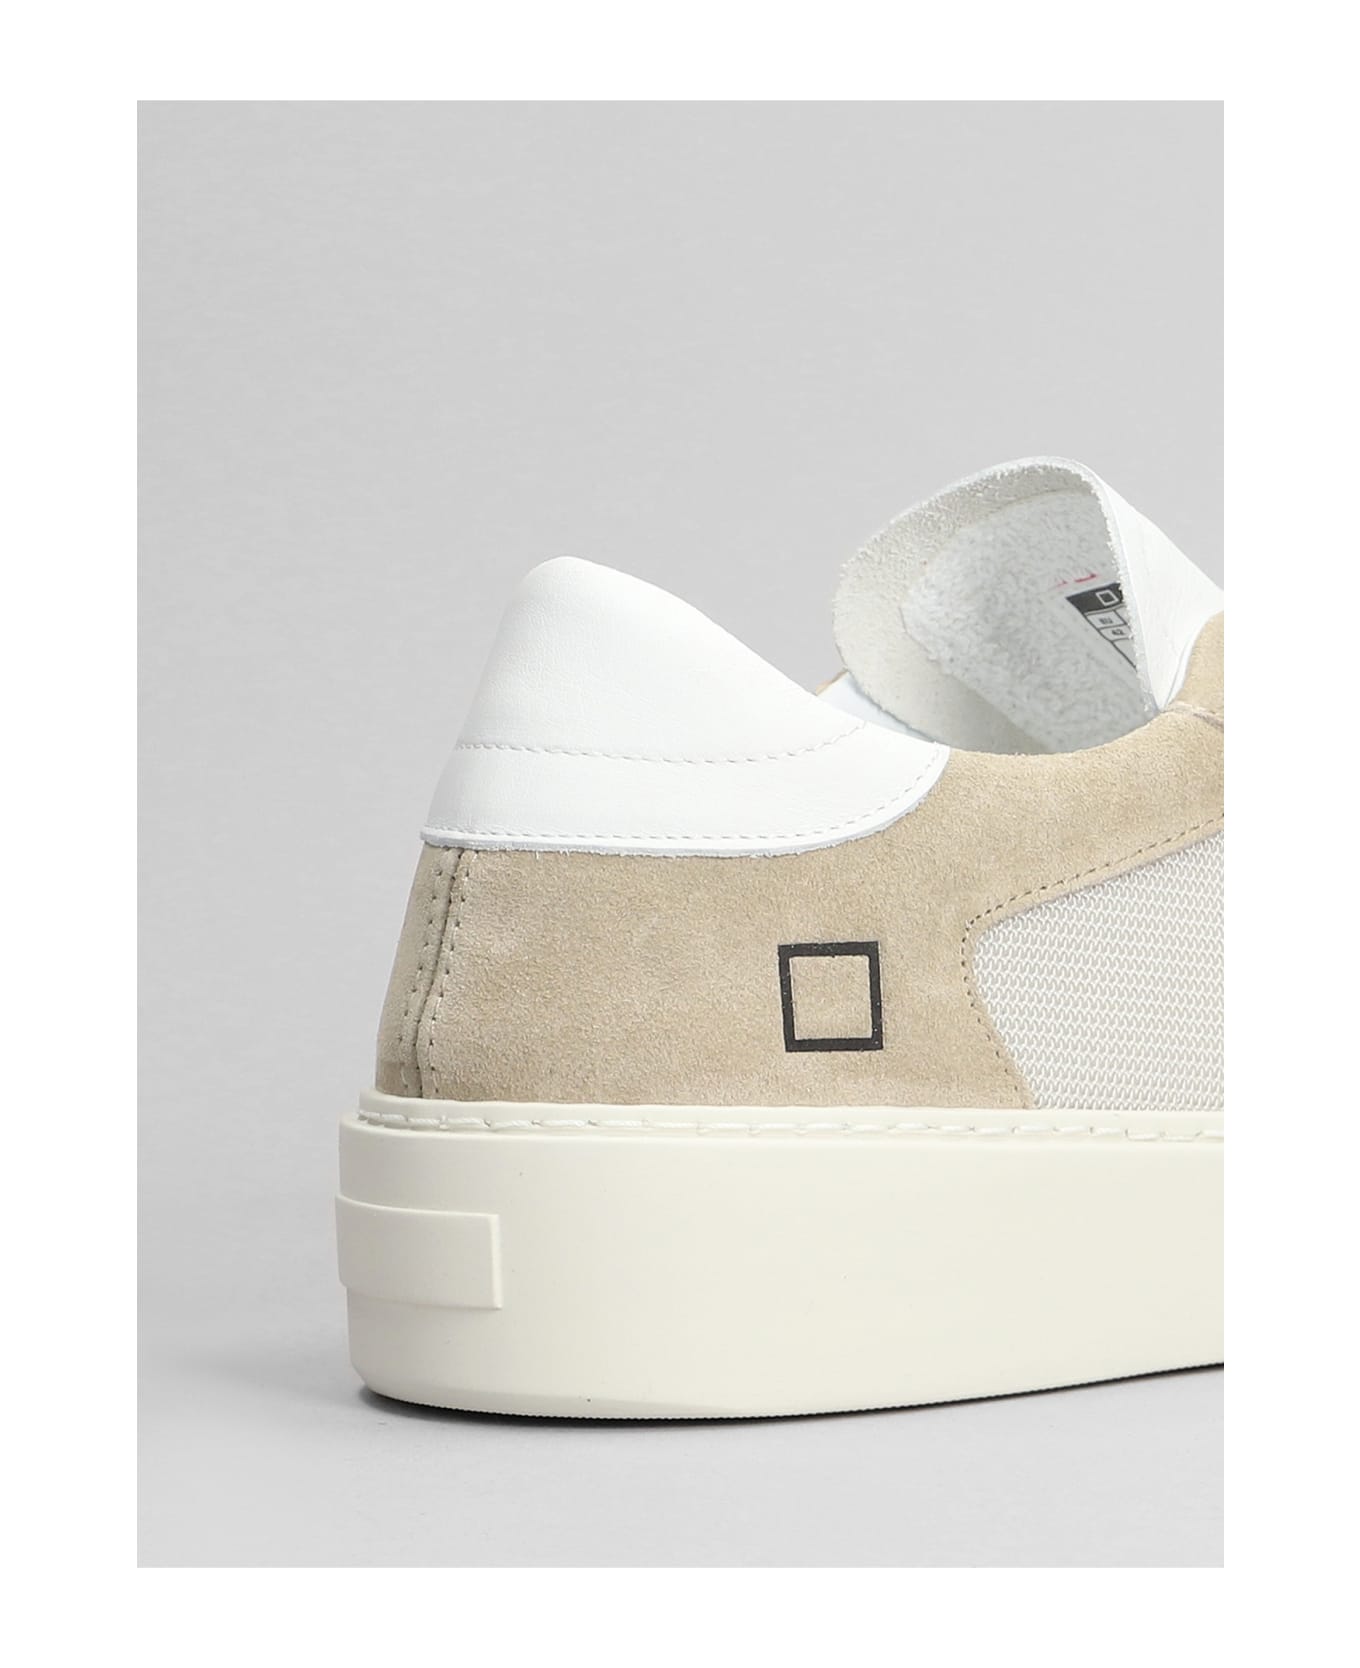 D.A.T.E. Levante Dragon Sneakers In Beige Suede And Fabric - beige スニーカー